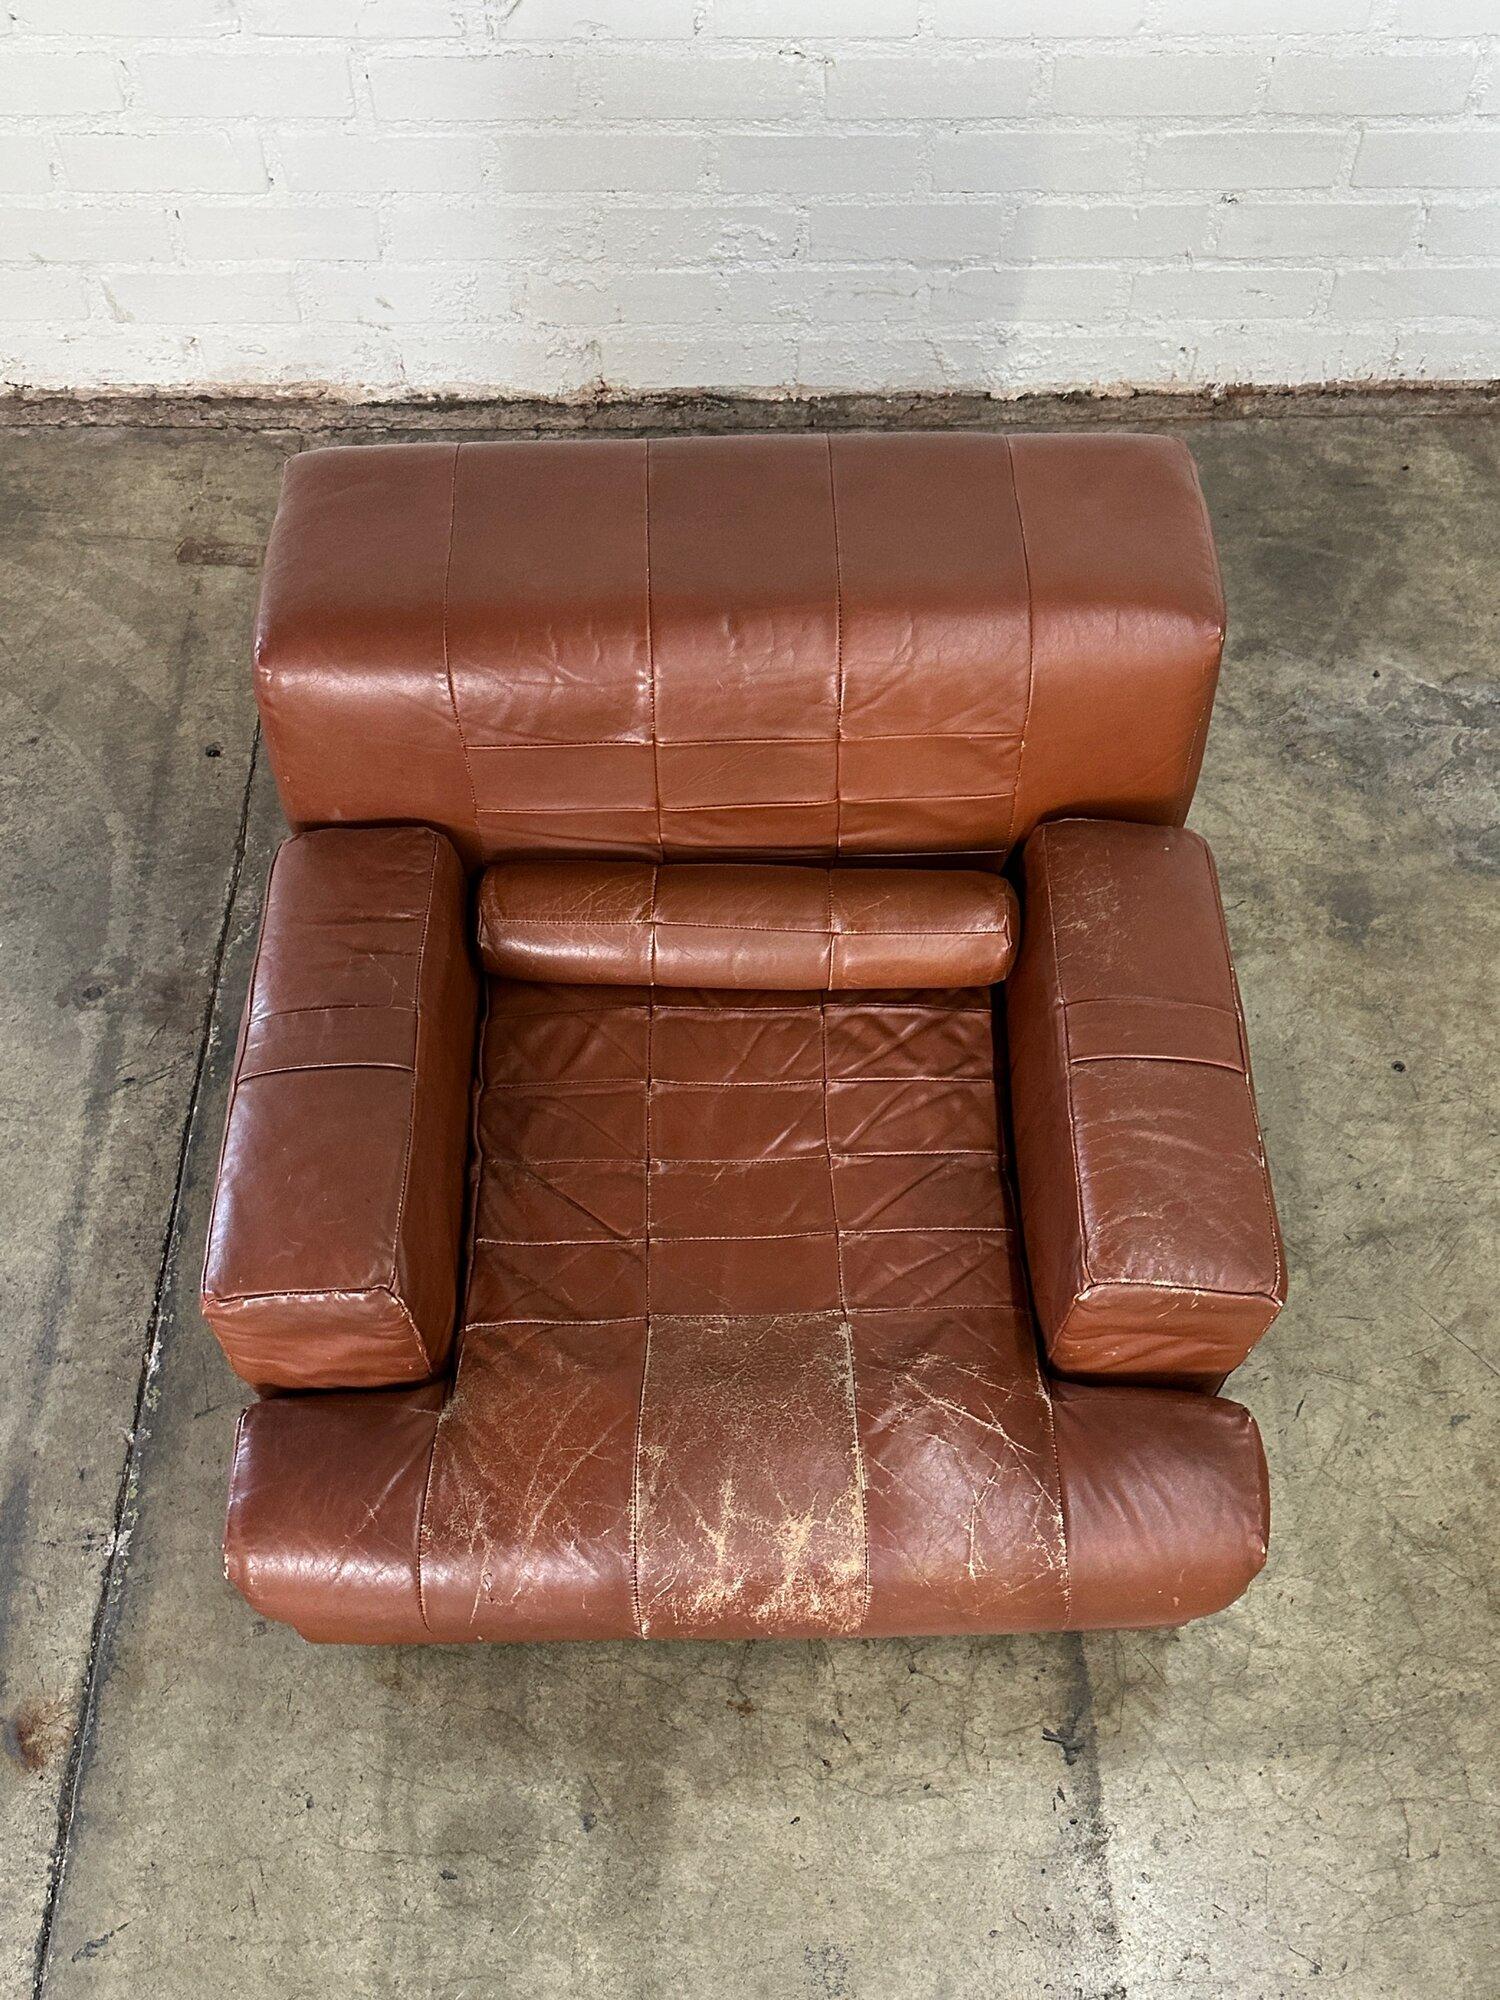 Ajustable Percival Lafer lounge chair and ottoman For Sale 7